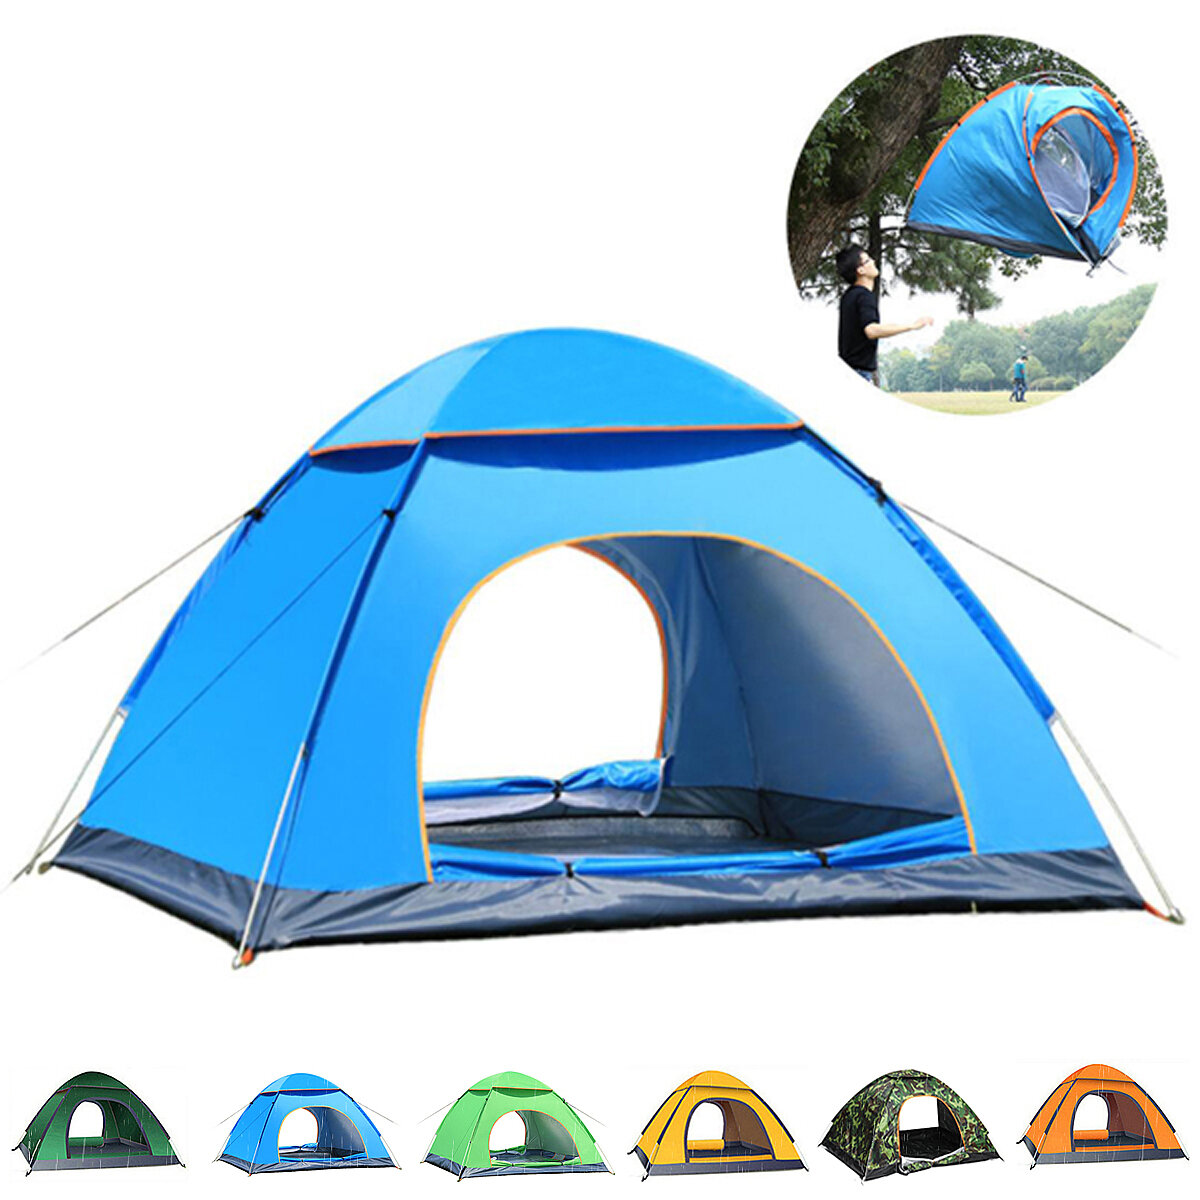 2-3 People Automatic Camping Tent 2 Door Breathable Waterproof Family Tent UV Protection Sunshade Canopy Outdoor Travel Beach